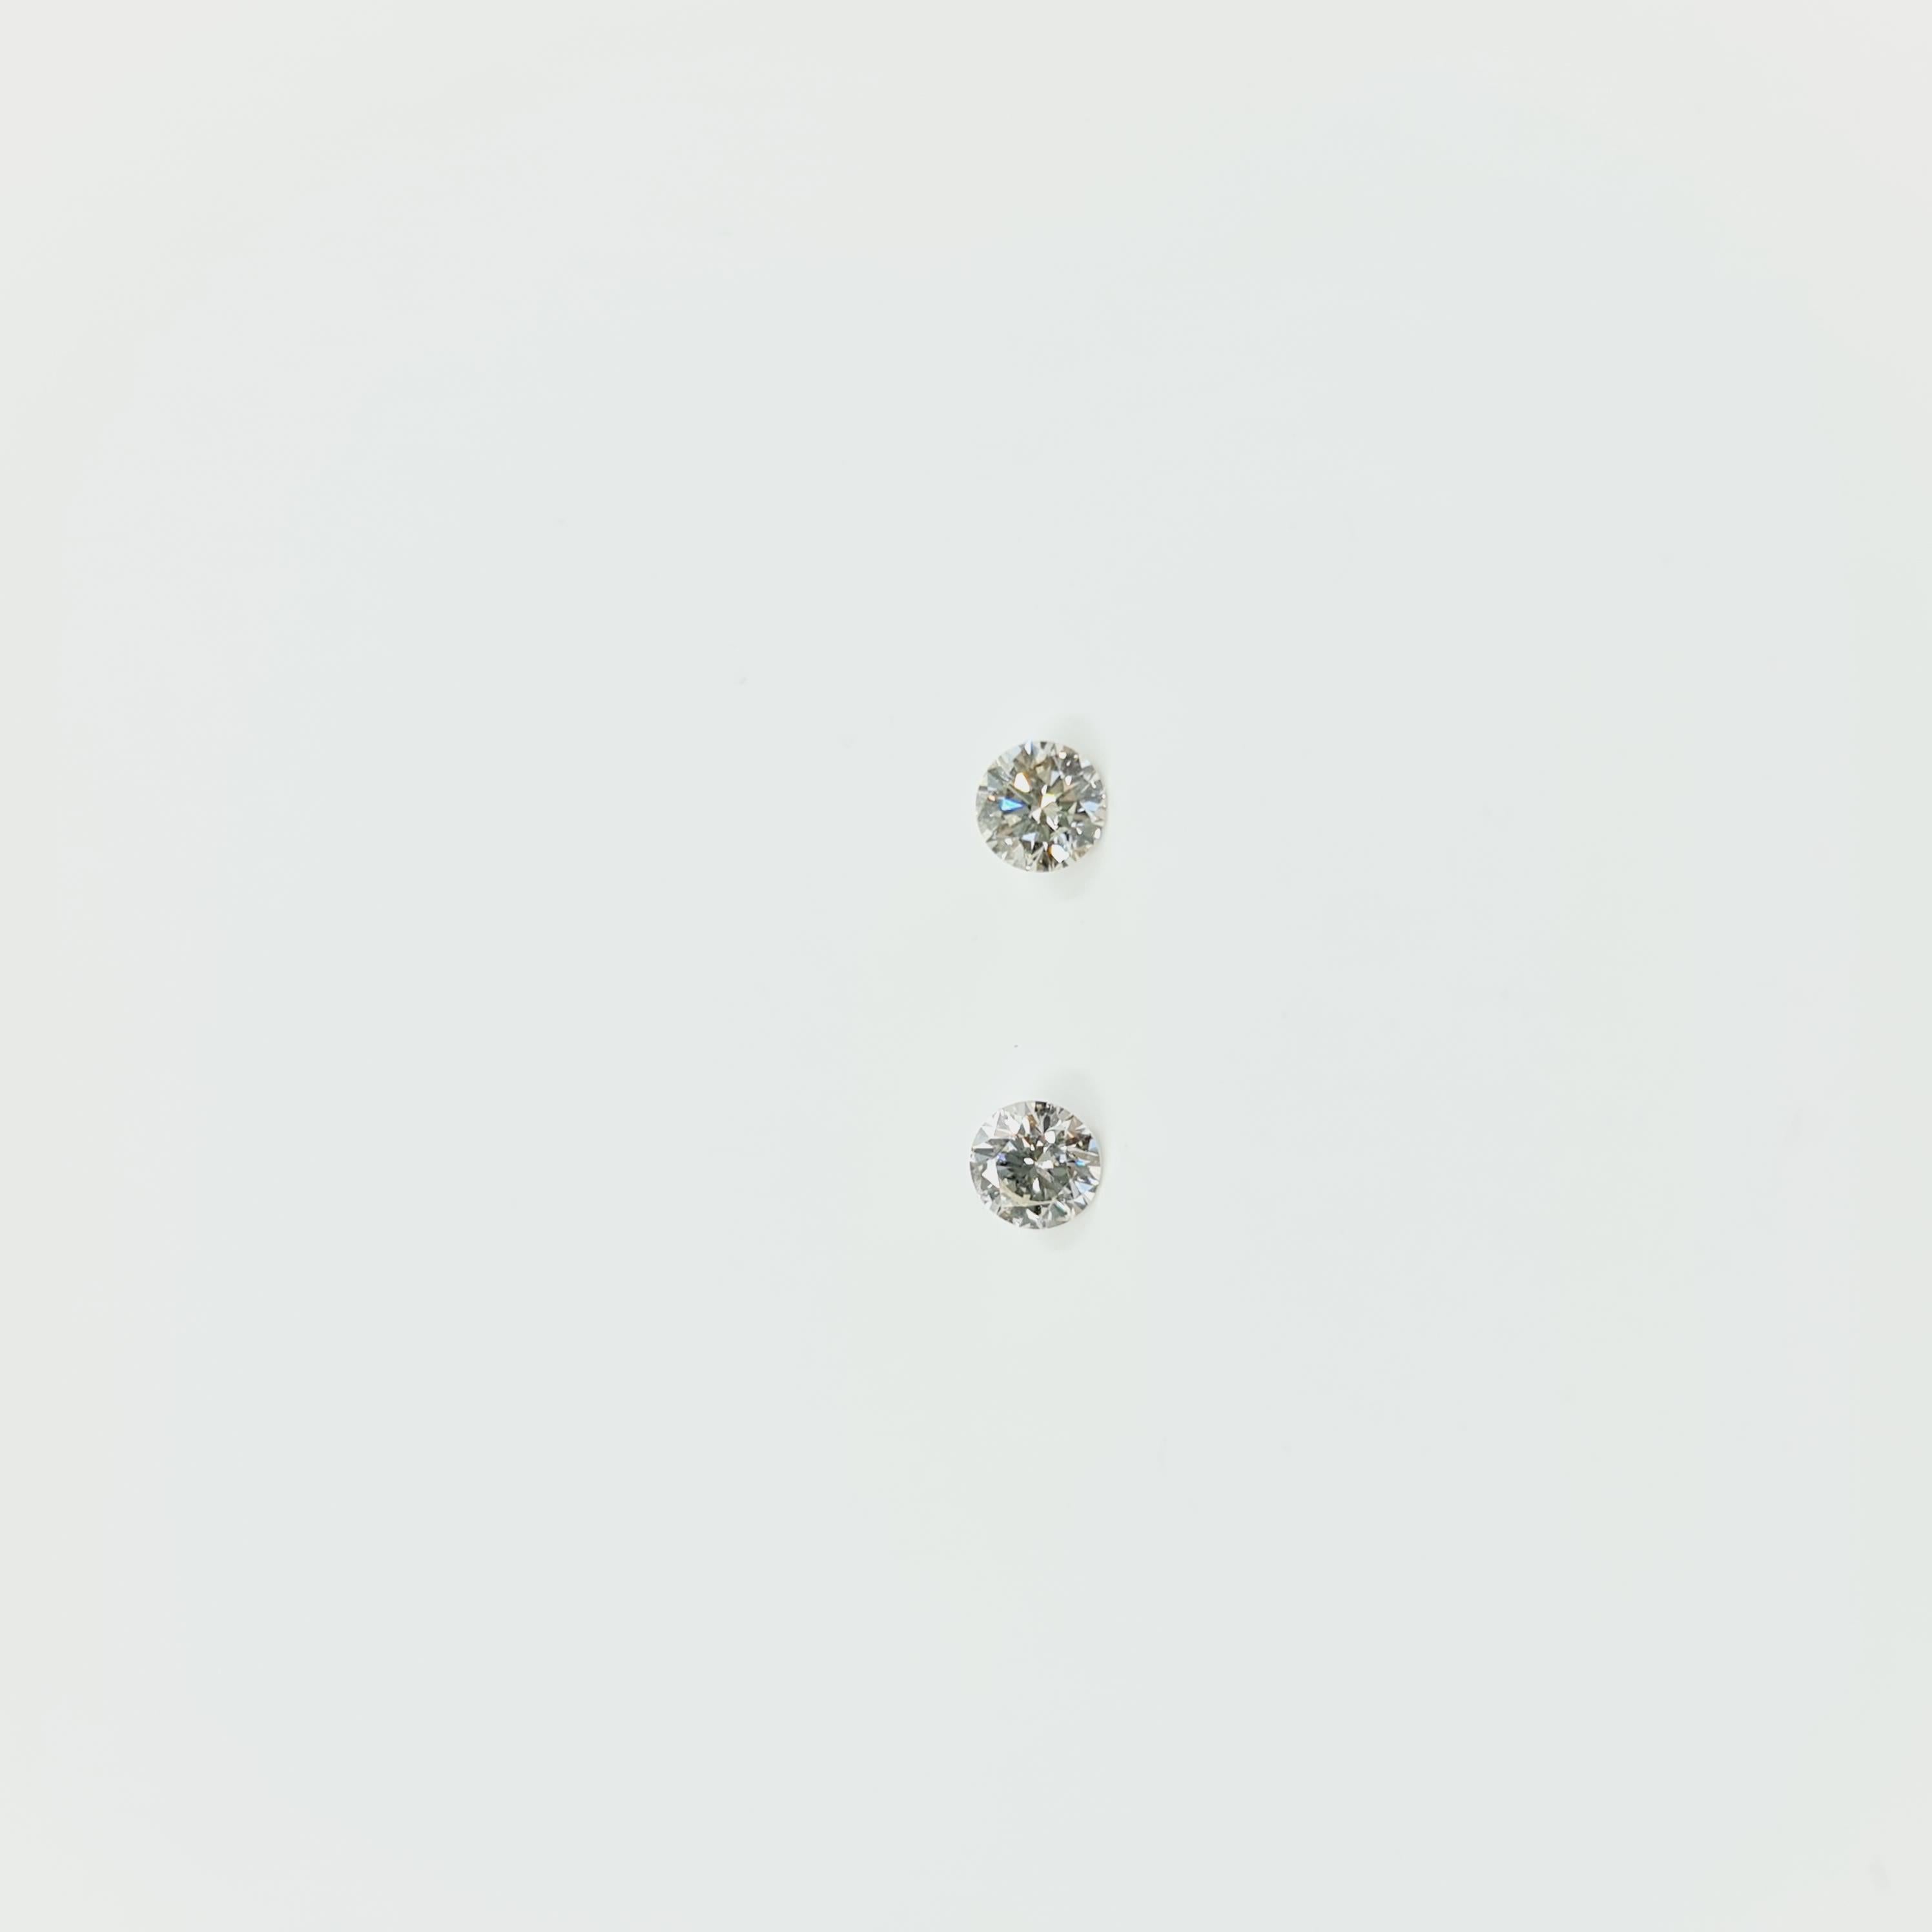 GIA Certified Solitaire Diamond Studs 0.24 Carat L/VS2, 0.24 Carat O-P/SI1 
750 Gold(White or Yellow on Demand) Diamond Studs with Brilliant Cut Diamonds.  
High Gloss Polished.   

5 C's:
Certificate: GIA
Carat: 0,24ct
Color: L
Clarity: VS2
Cut: